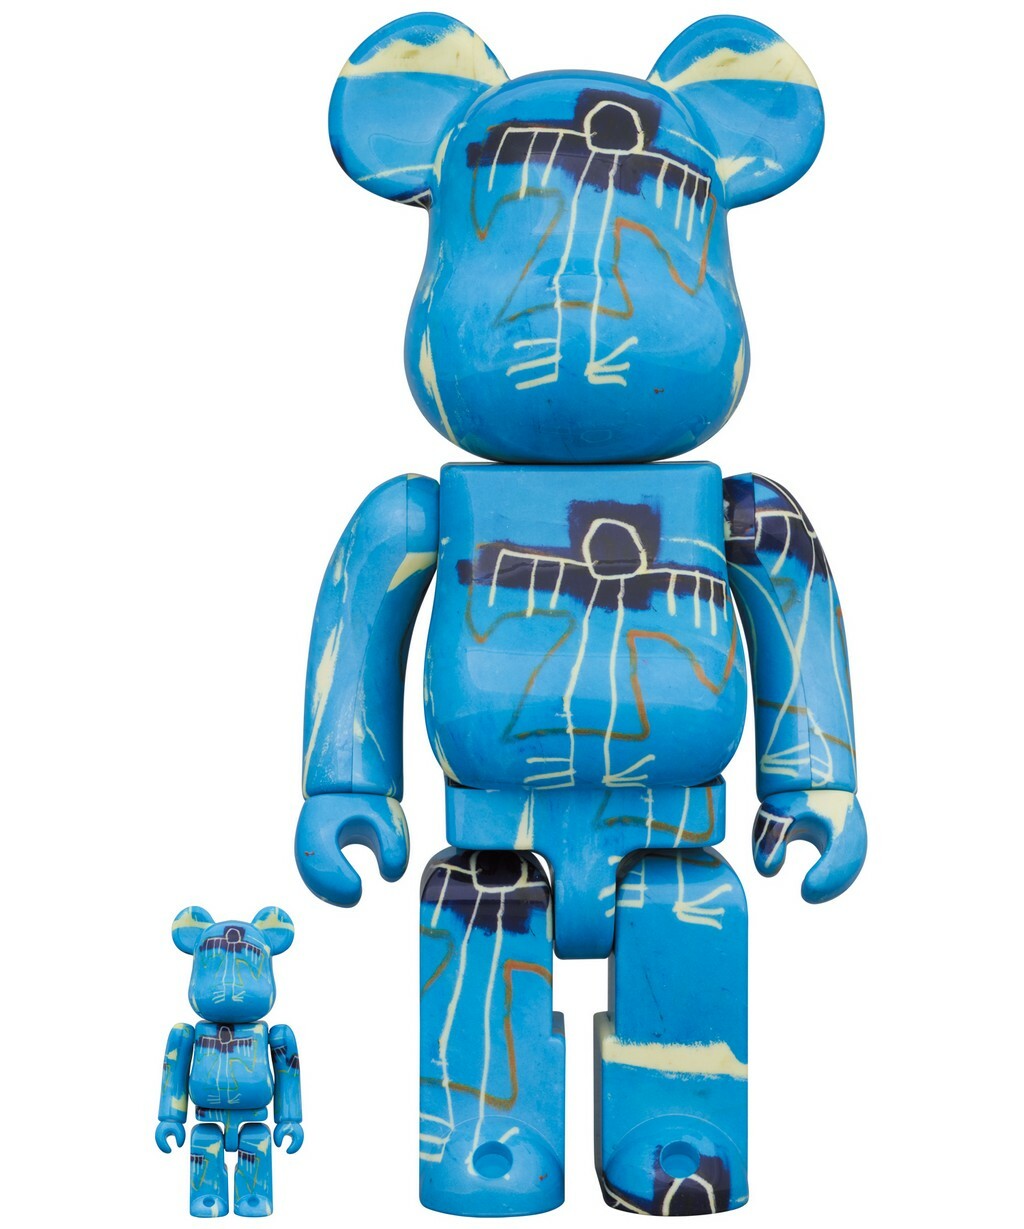 Jean Michel Basquiat: BE@RBRICK v9 (Blue Angel) 100% & 400% Figure set - Art Toy, basquiat, be@rbrick, blue angel, exceptional collecting, Jean-Michel Basquiat, limited edition, medicom toy, new arrival, New Arrivals - Gadgetz Home